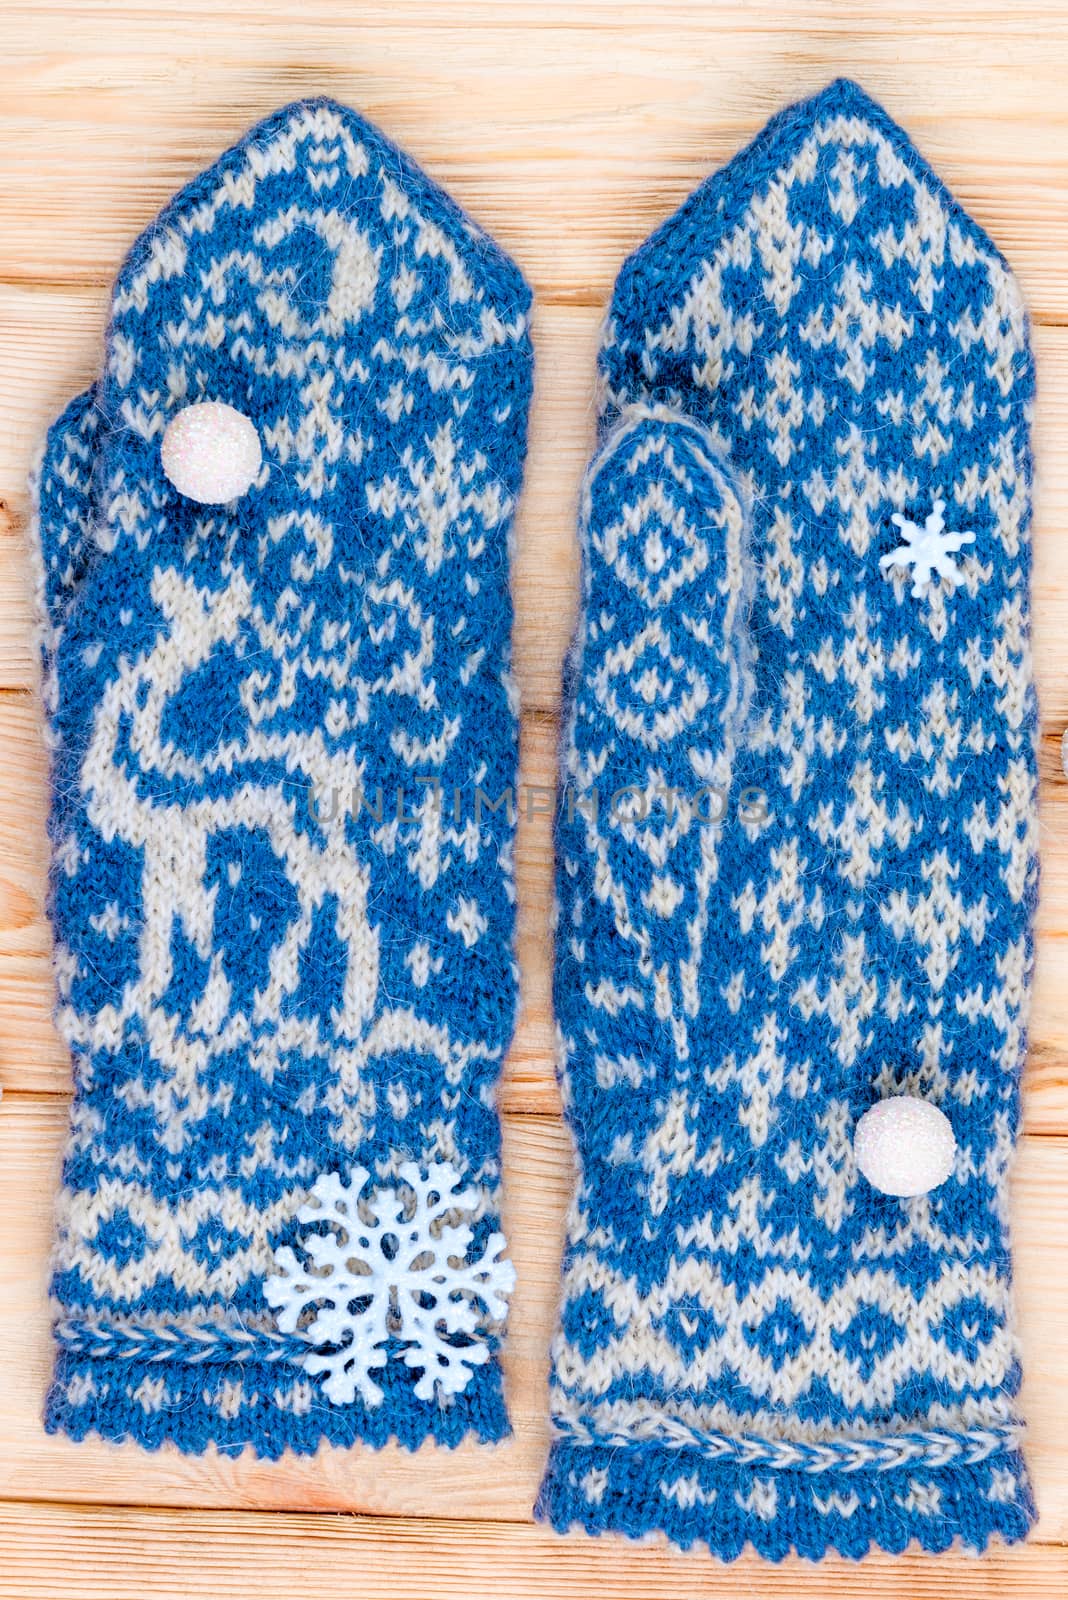 handmade blue mittens with a deer pattern are warm and soft close-ups